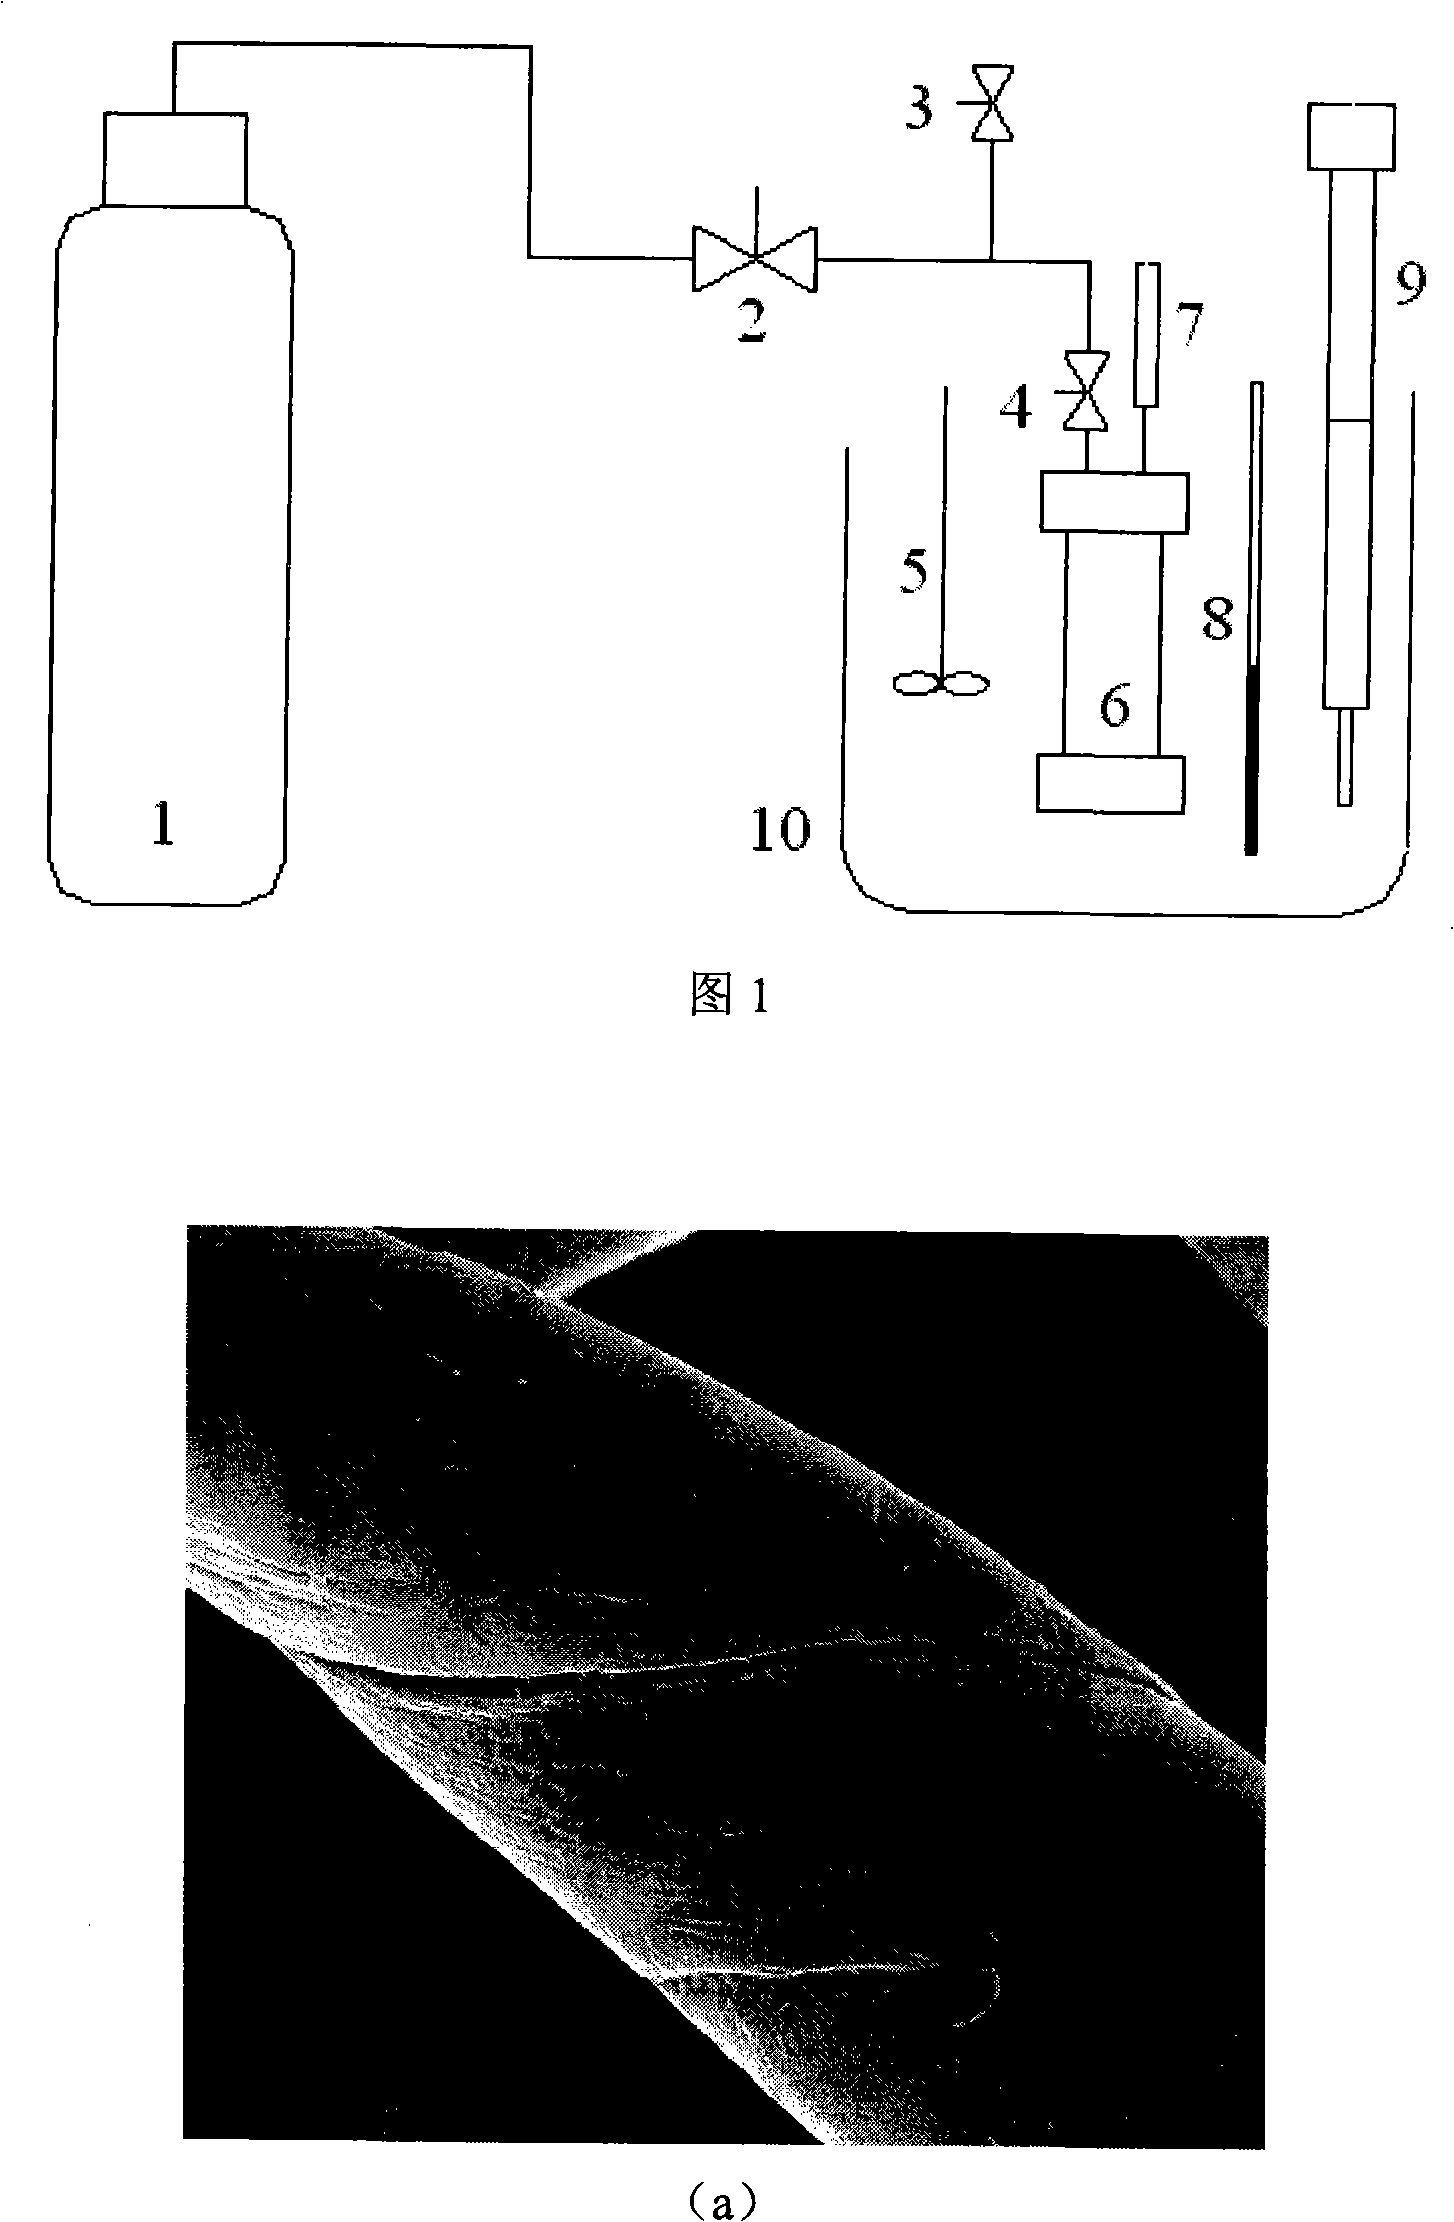 Method for preparing organic or inorganic composite fiber material with supercritical carbonic anhydride